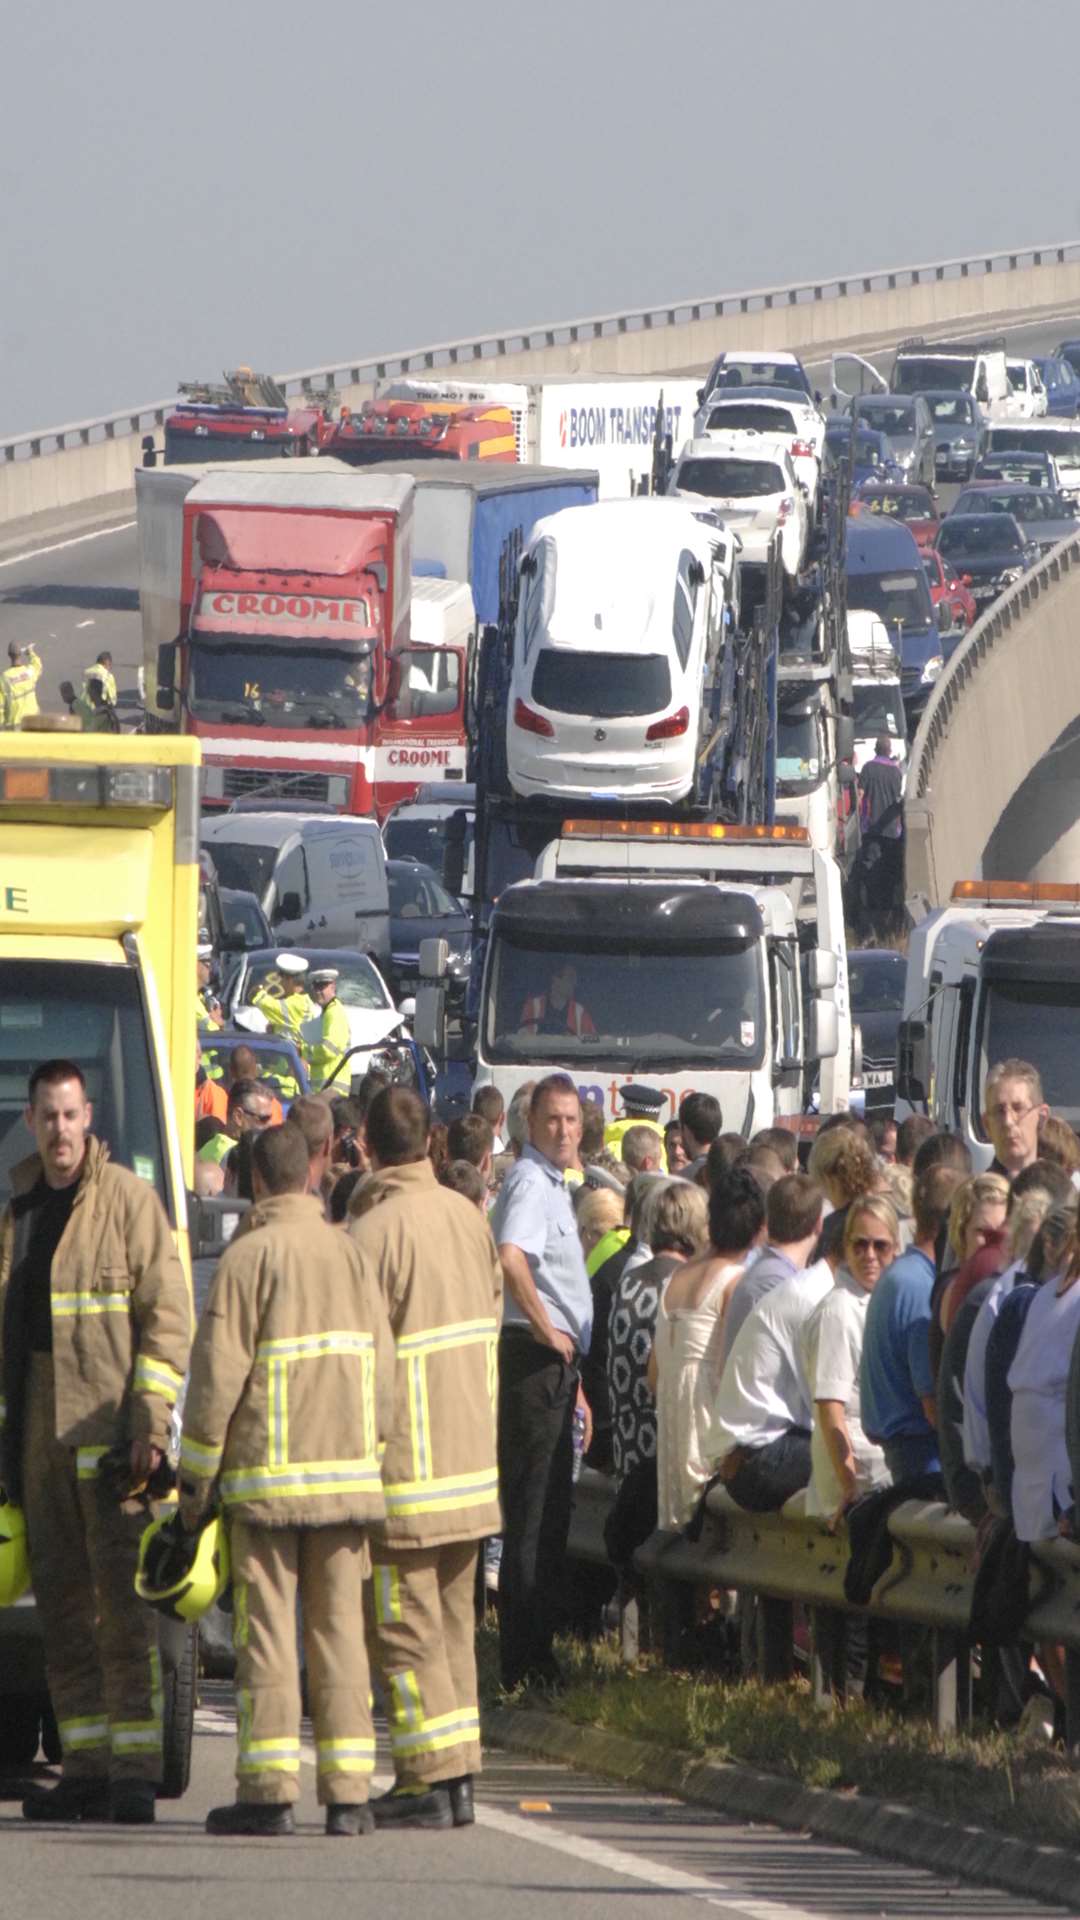 Victims at the scene of the horrific pile-up at the Sheppey Crossing